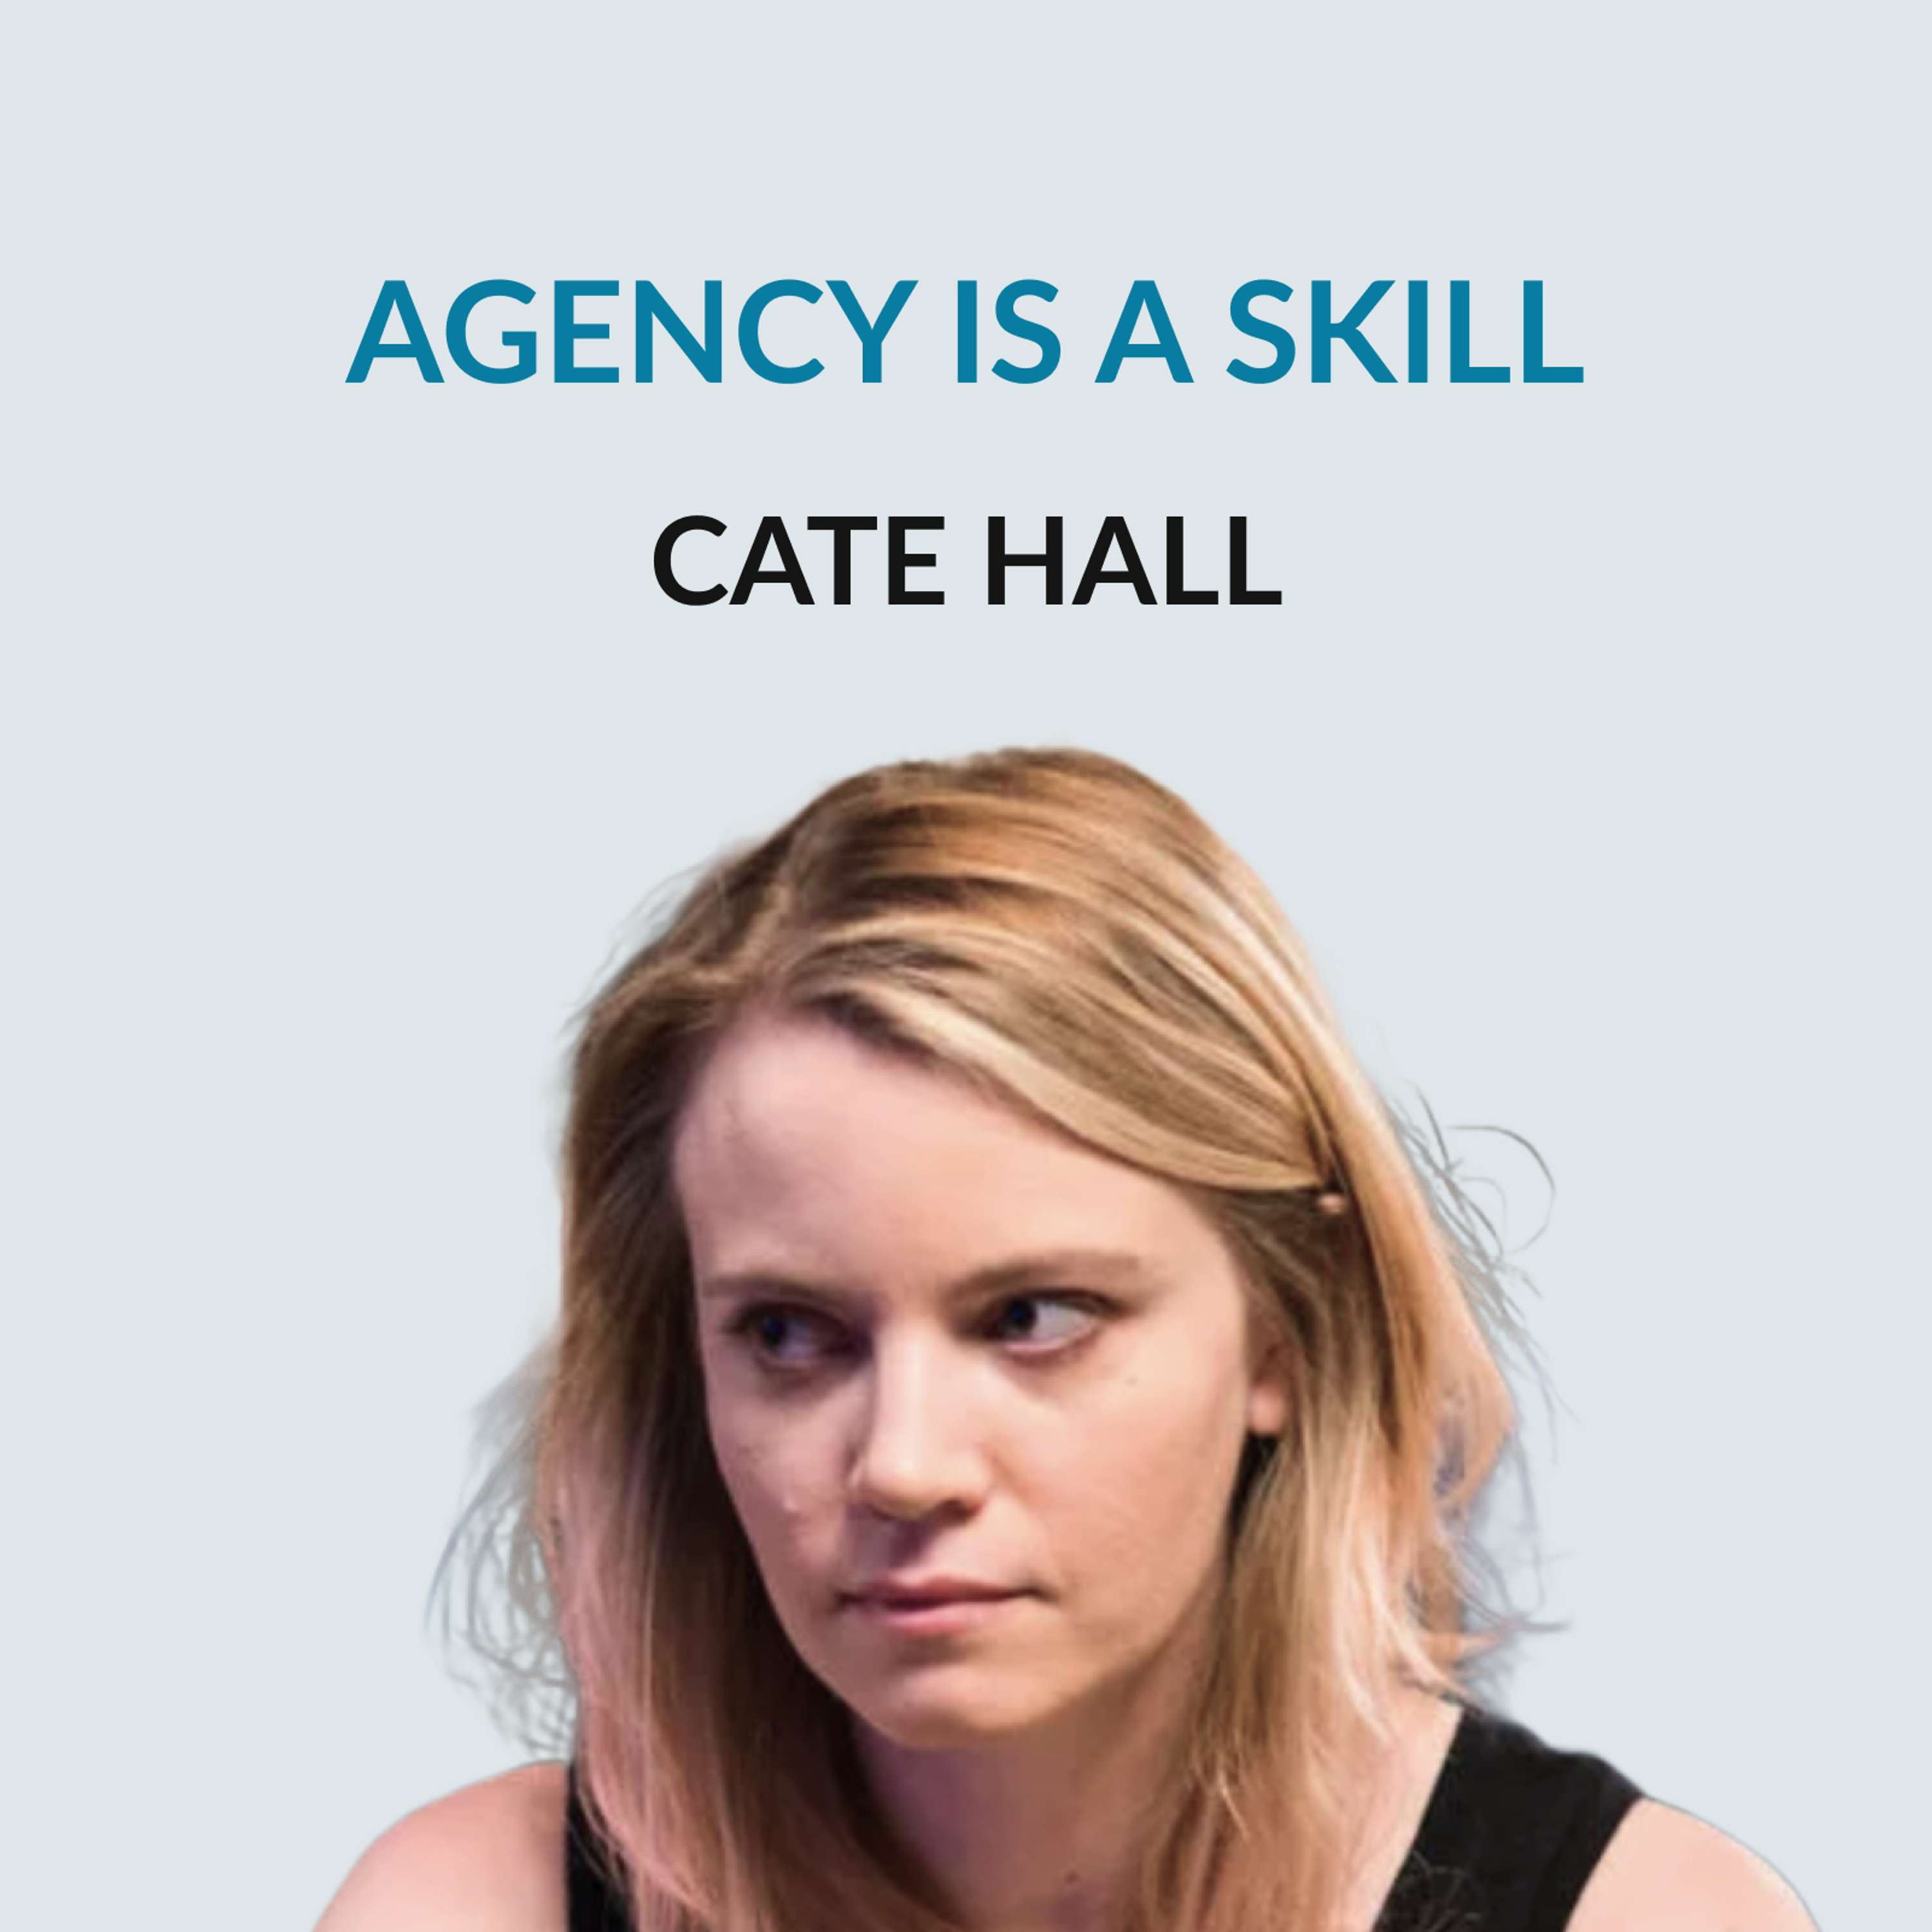 #174 Agency Is A Skill — Cate Hall on leaving law for poker, developing agency, deterministic vs probabilistic economy, risk, burnout, asking dumb questions, defining ambition, seeking real feedback, and the surface area of luck